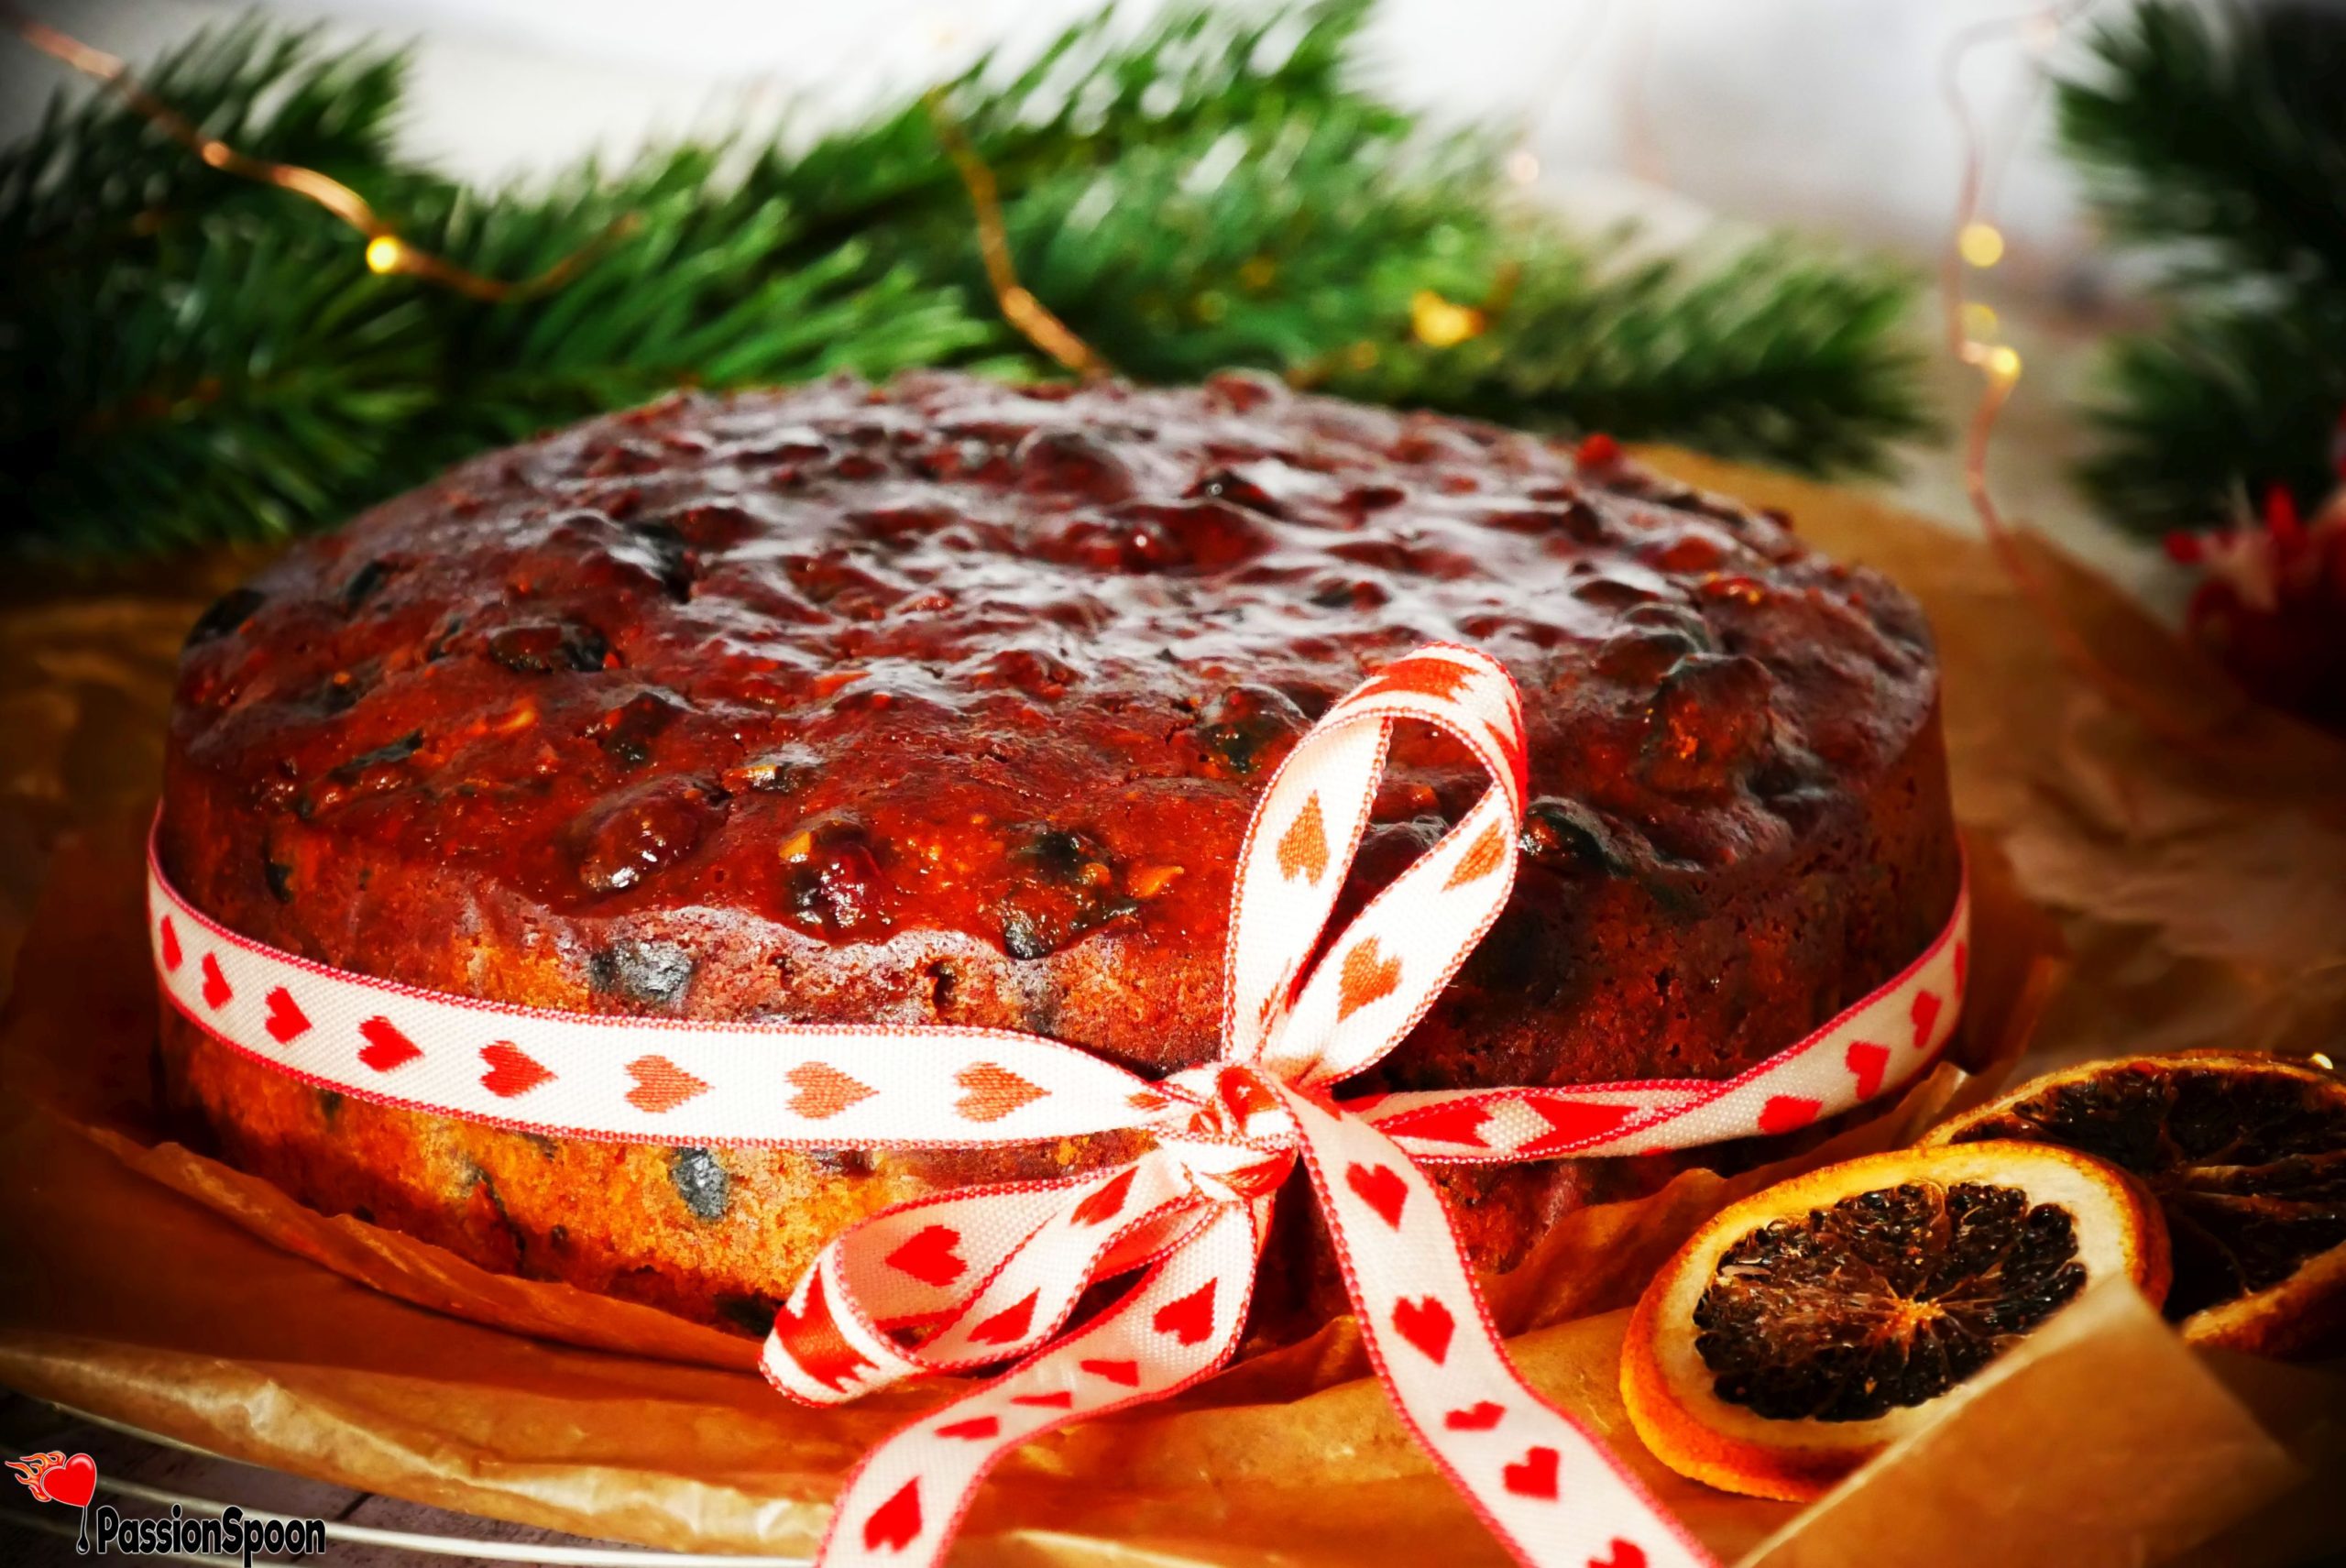 Tips and Tricks for Making Delicious Fruitcake This Holiday Season